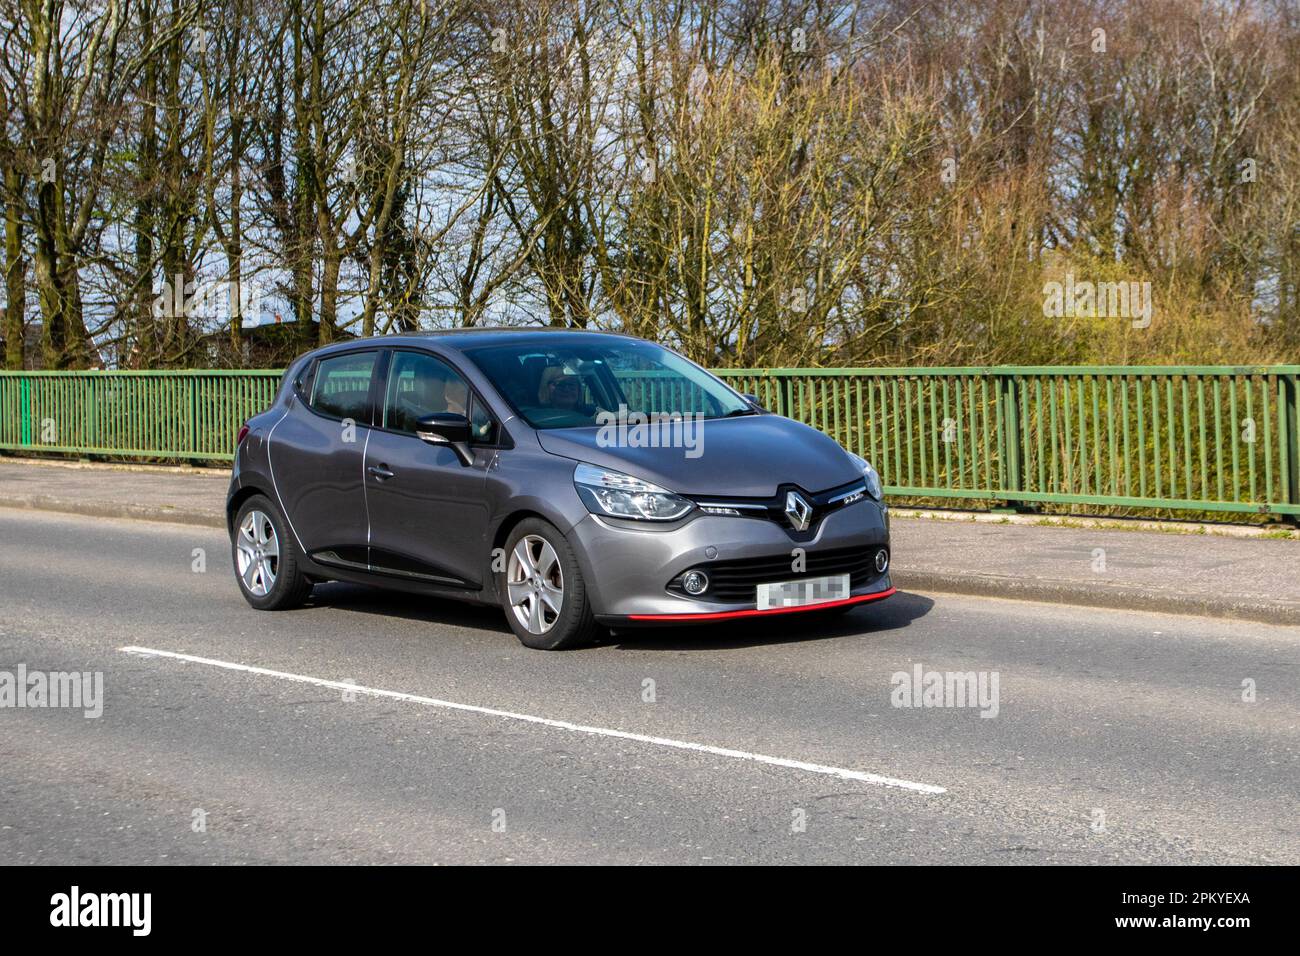 Renault hatchback 1 dci hi-res stock and images - Alamy